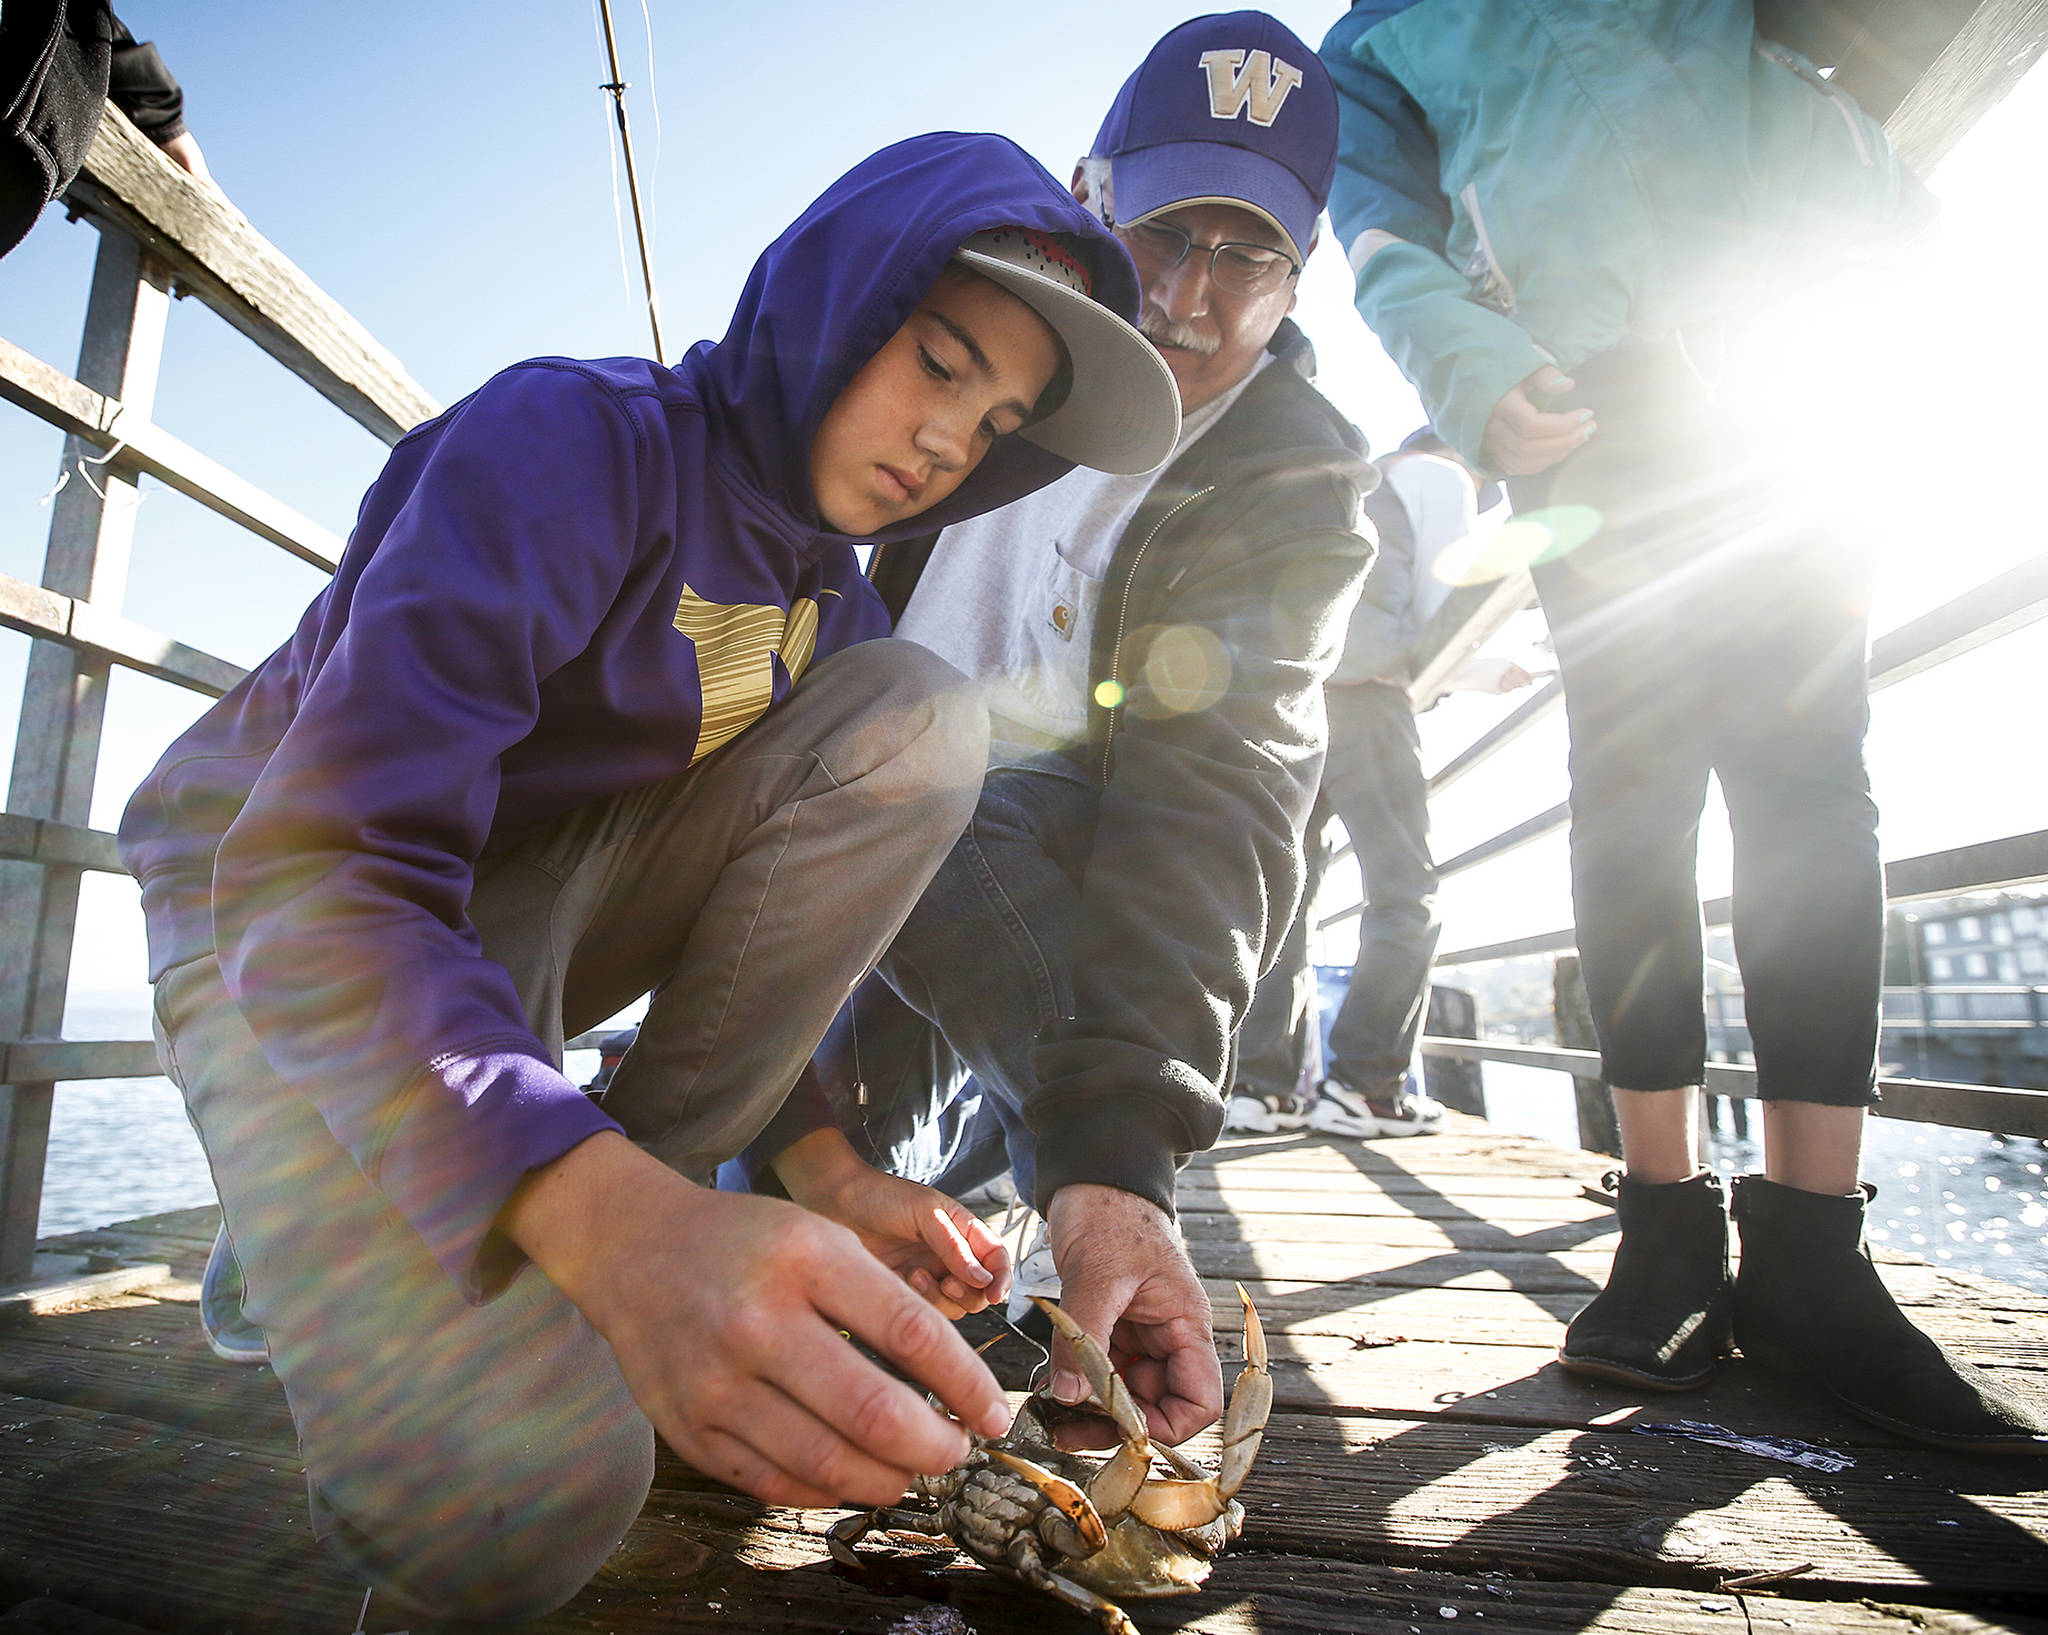 Noah Edwards (left), then 12, of Mukilteo, checks out a crab he caught with his grandfather, Steve Edwards, of Snohomish, during the 2016 fishing derby at the Mukilteo Lighthouse Festival. (Herald file)